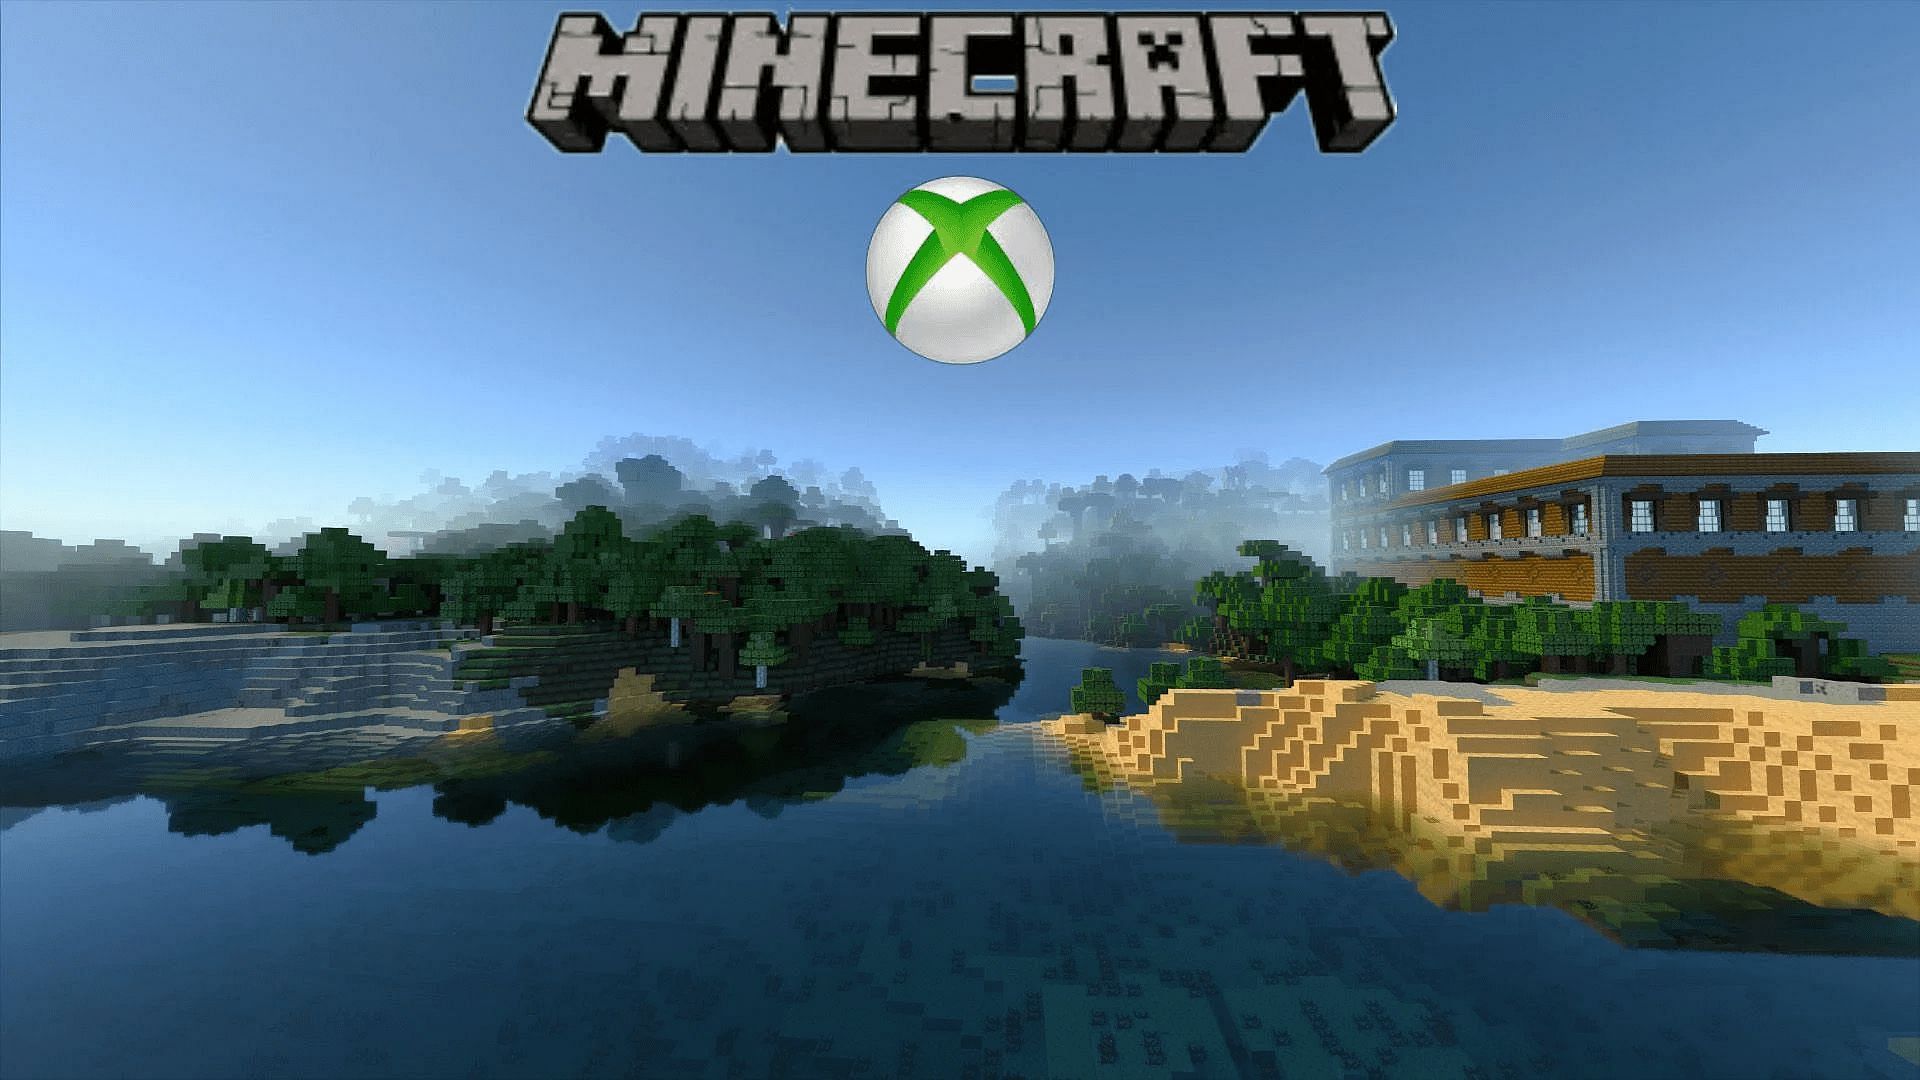 Xbox consoles can update Minecraft quickly and effectively (Image via Mojang/Microsoft)